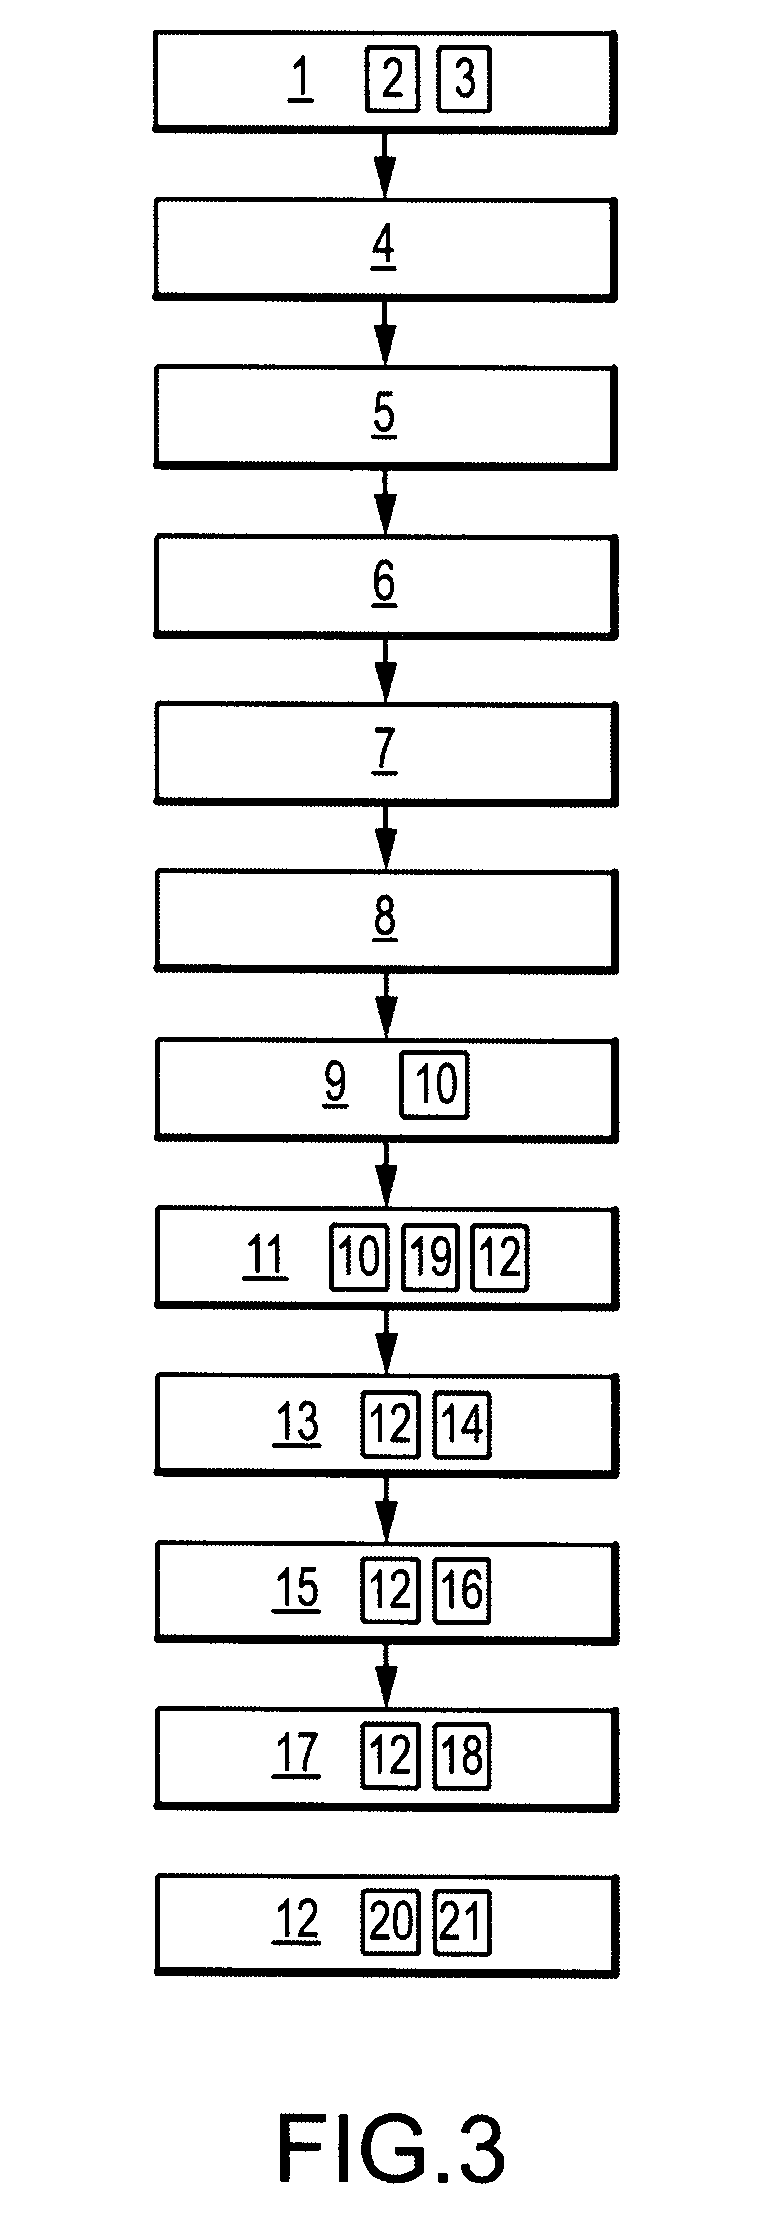 Differential evaporation potentiated disinfectant system